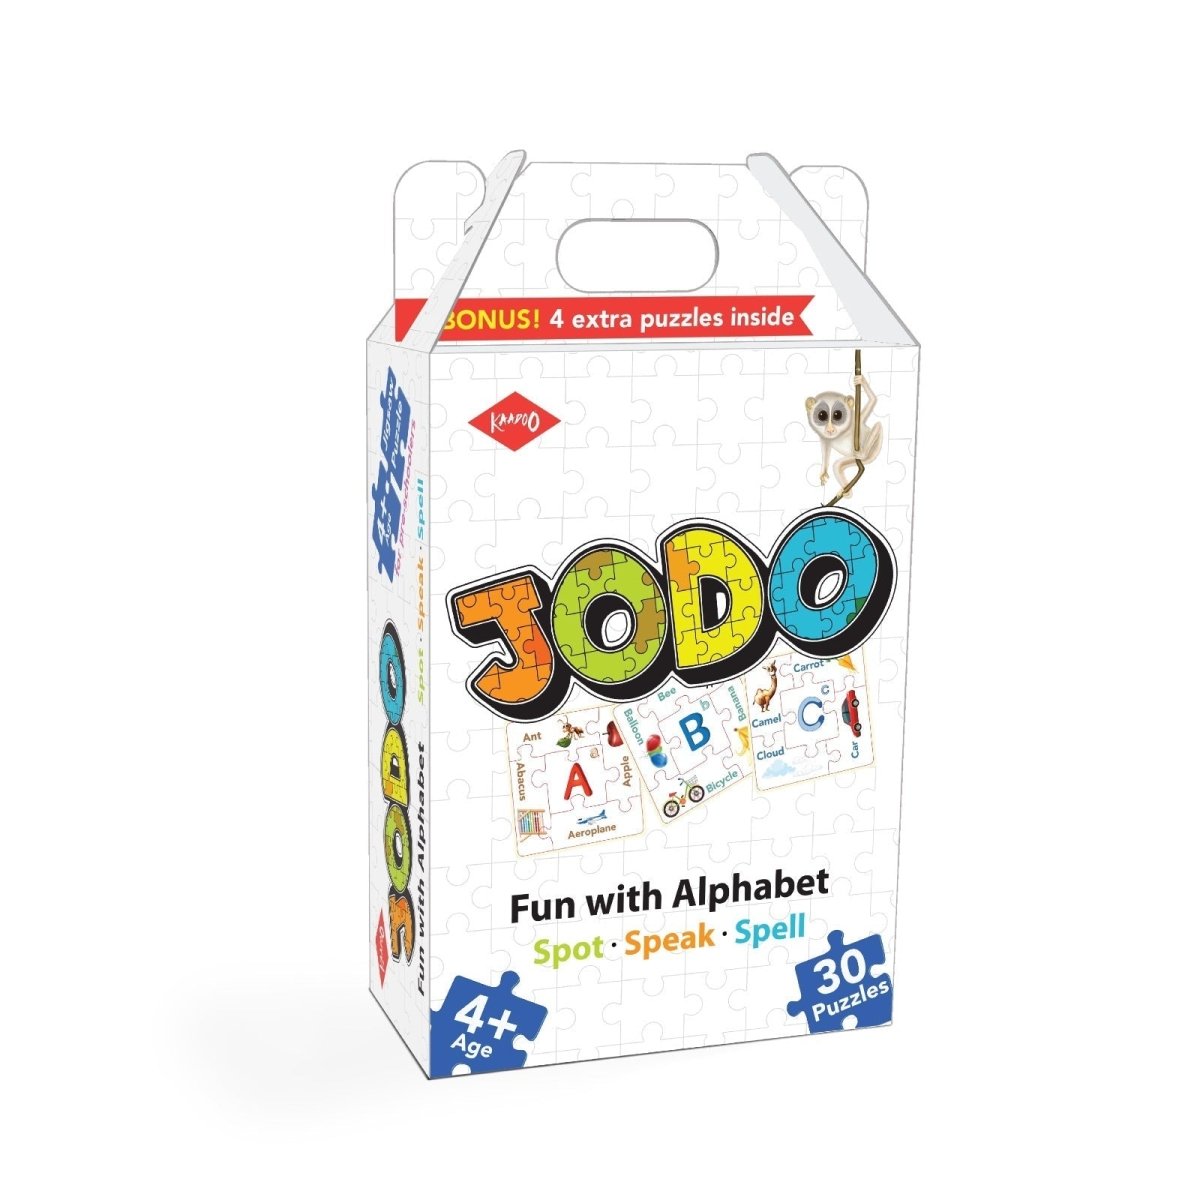 Kaadoo Jodo Alphabet Play And Learn Puzzle Game for Kids - KD-JABC